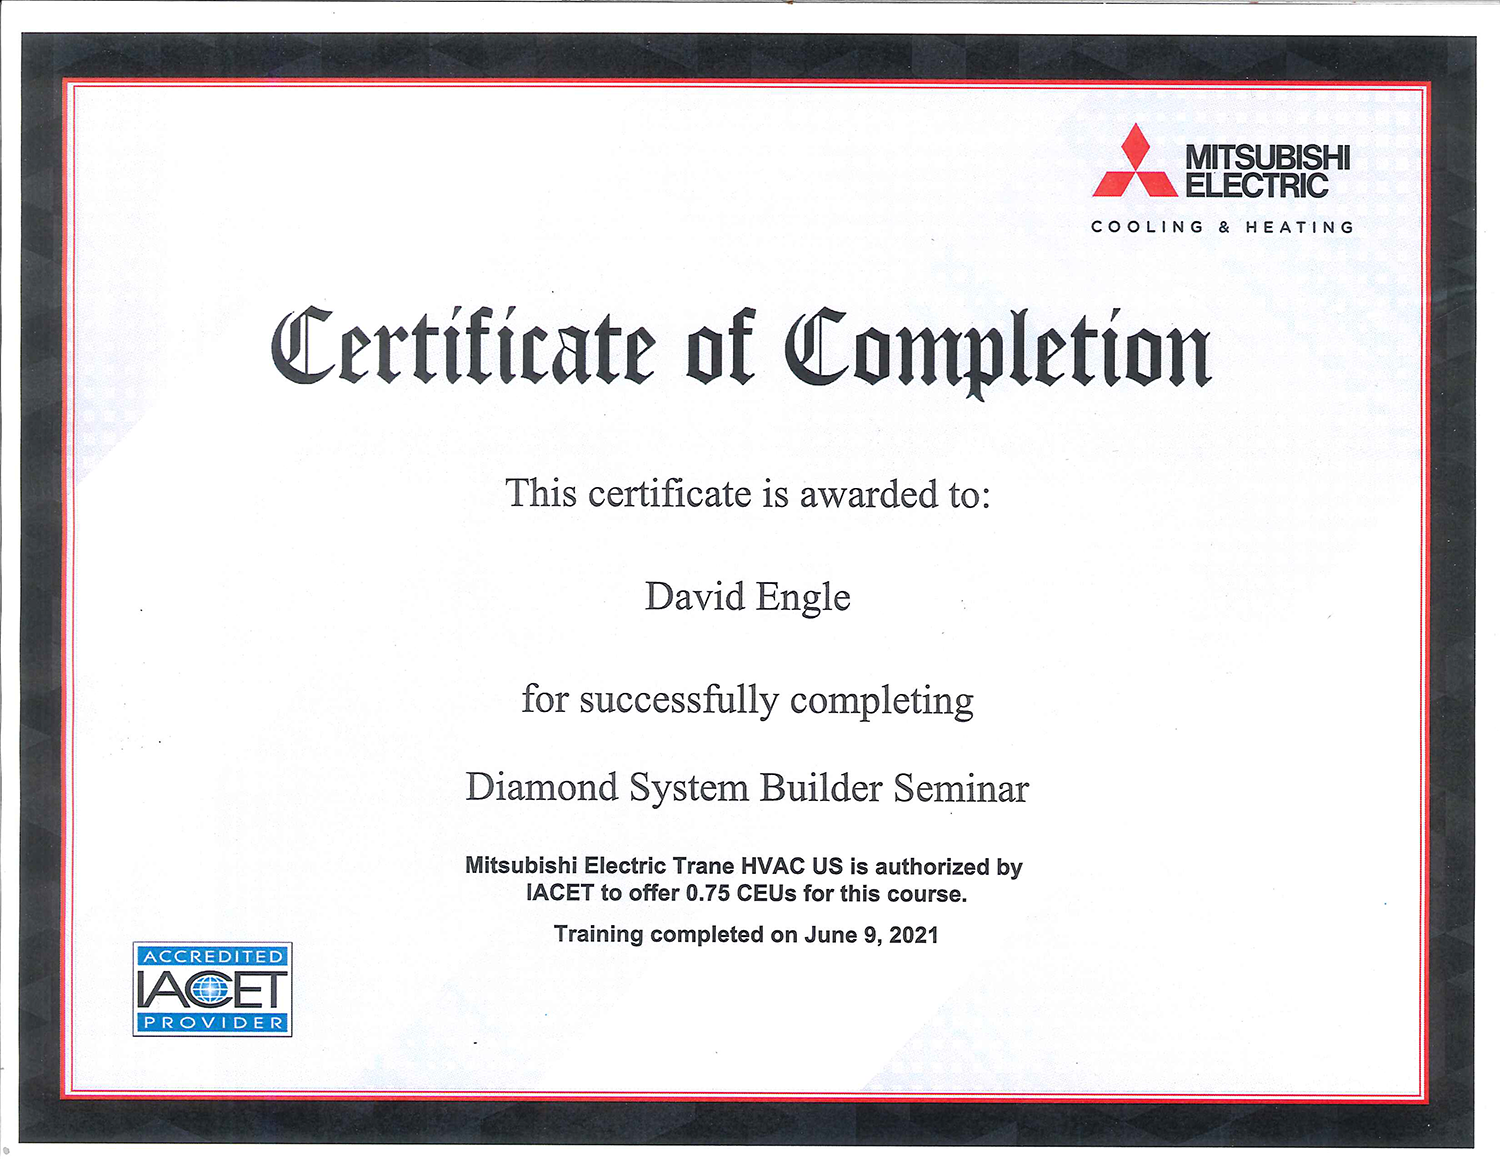 mitsubishi-certificate-of-completion